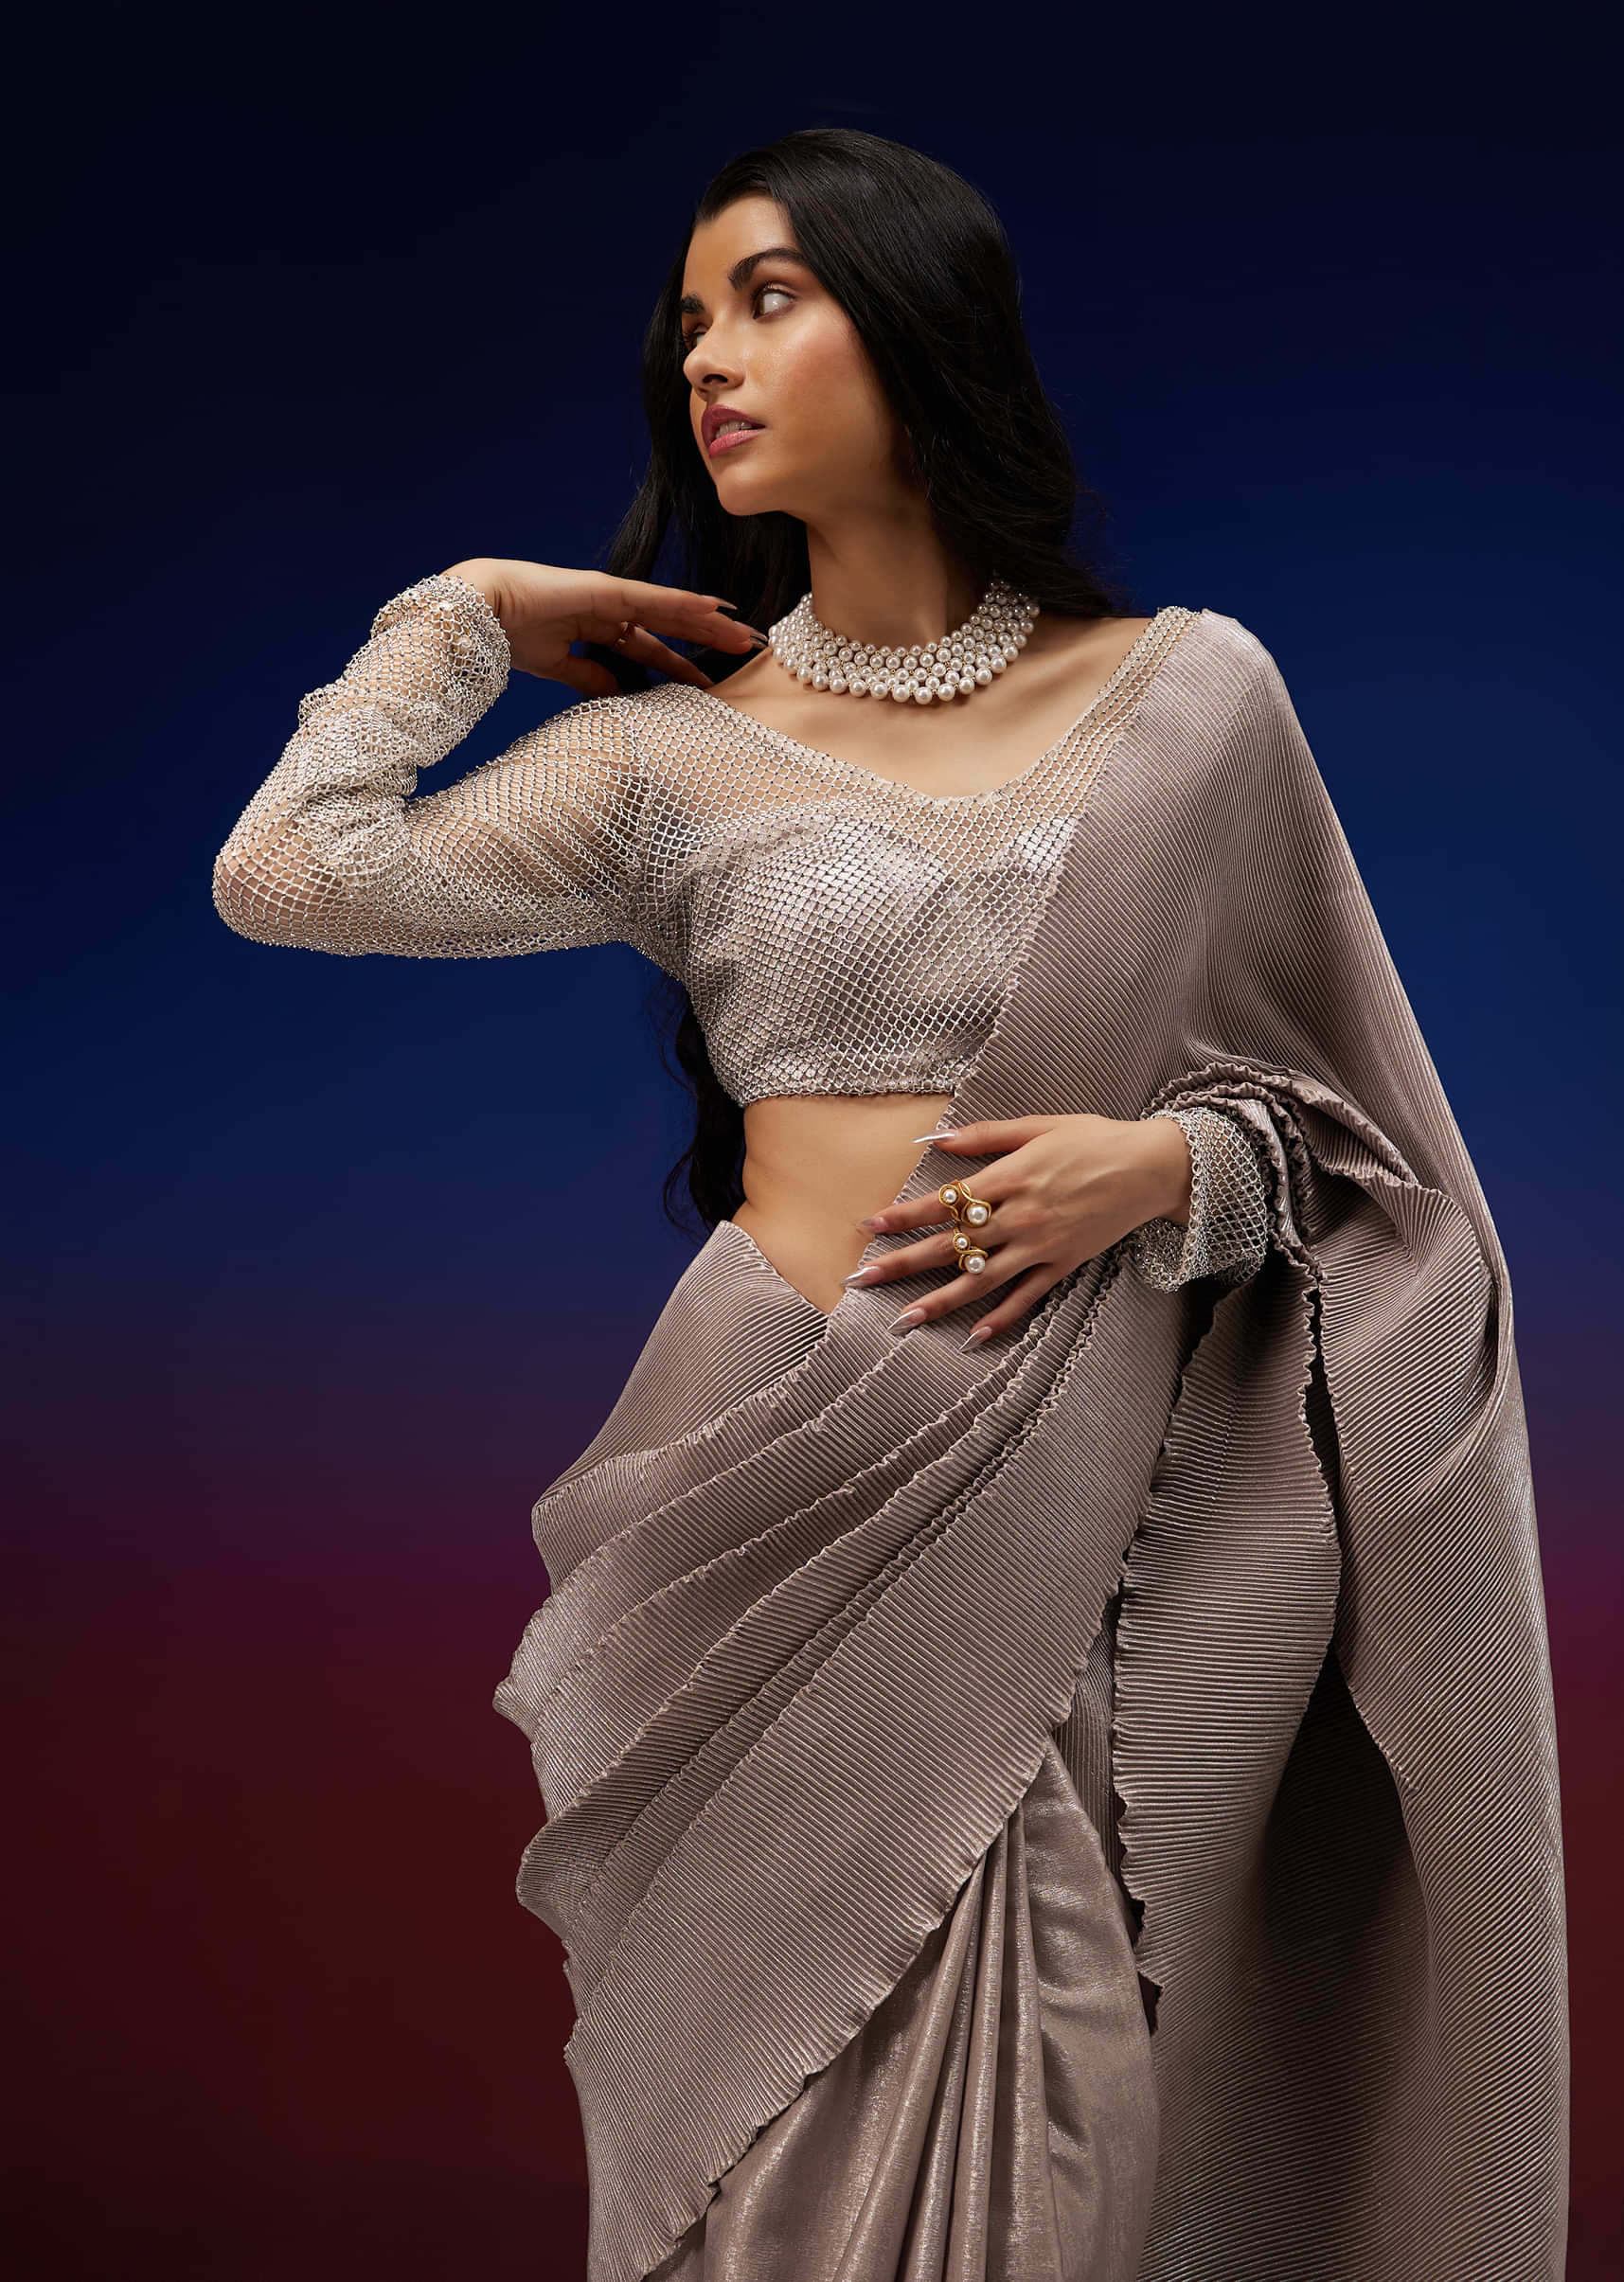 https://newcdn.kalkifashion.com/media/catalog/product/g/o/gold_colored_unstitched_saree_with_silver-sg147515_4_.jpg?aio-w=500